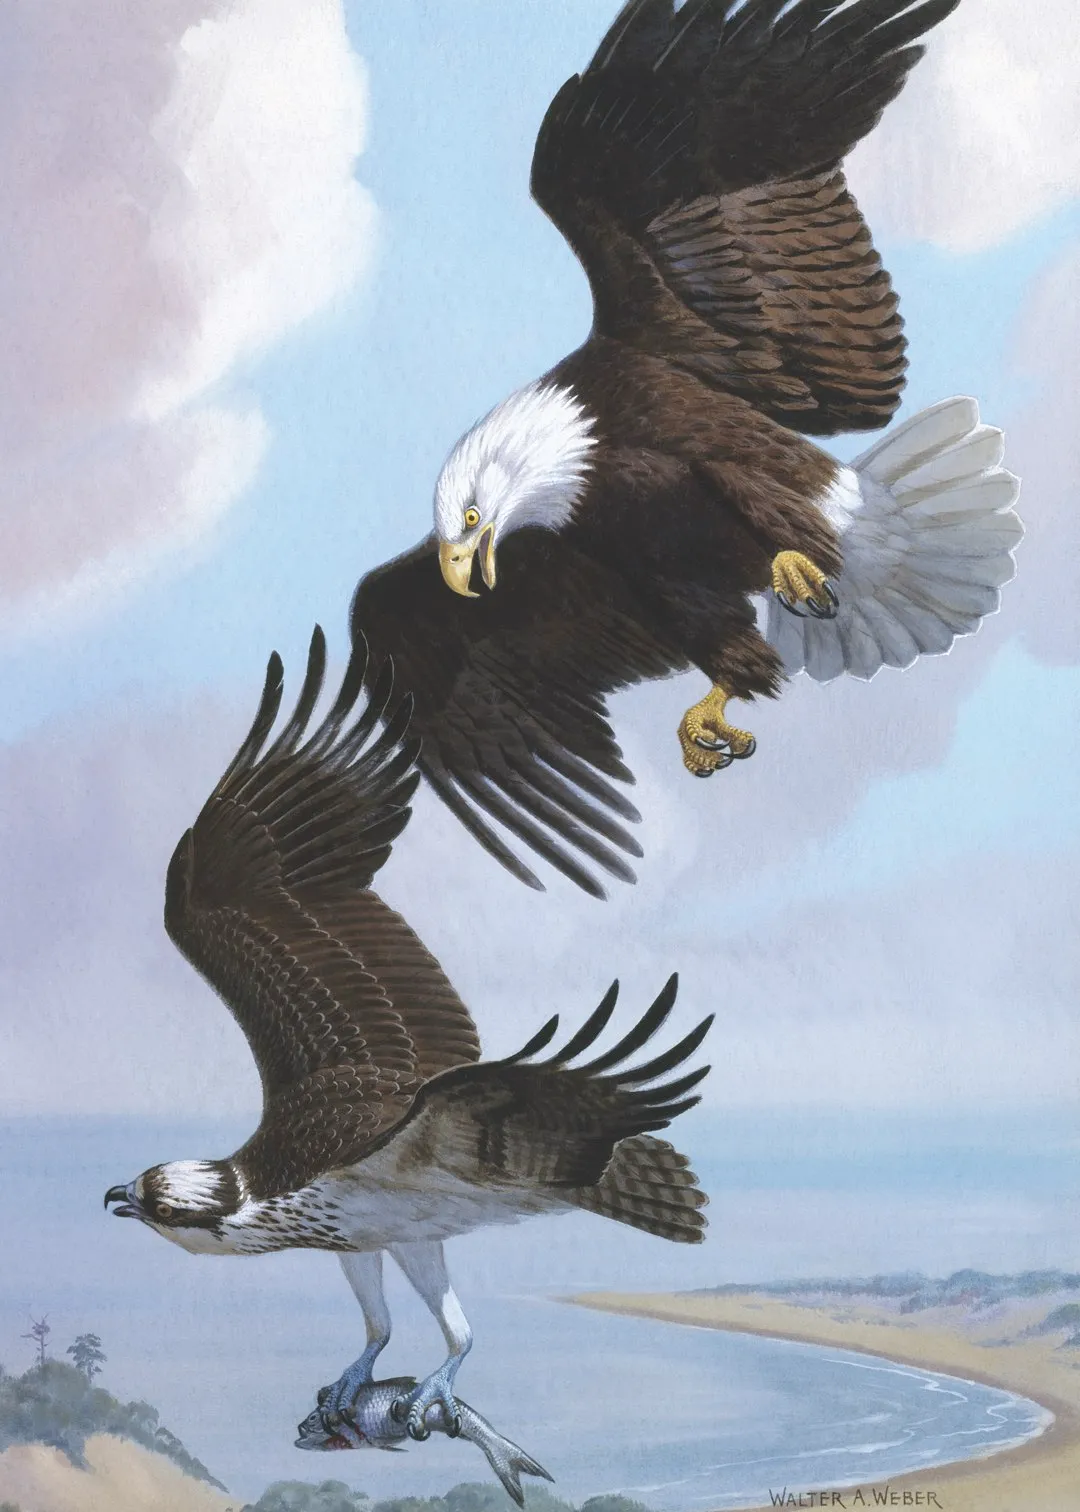 Walter A Weber’s 1950 painting for National Geographic Magazine provided the inspiration for the eagle on the Apollo 11 patch